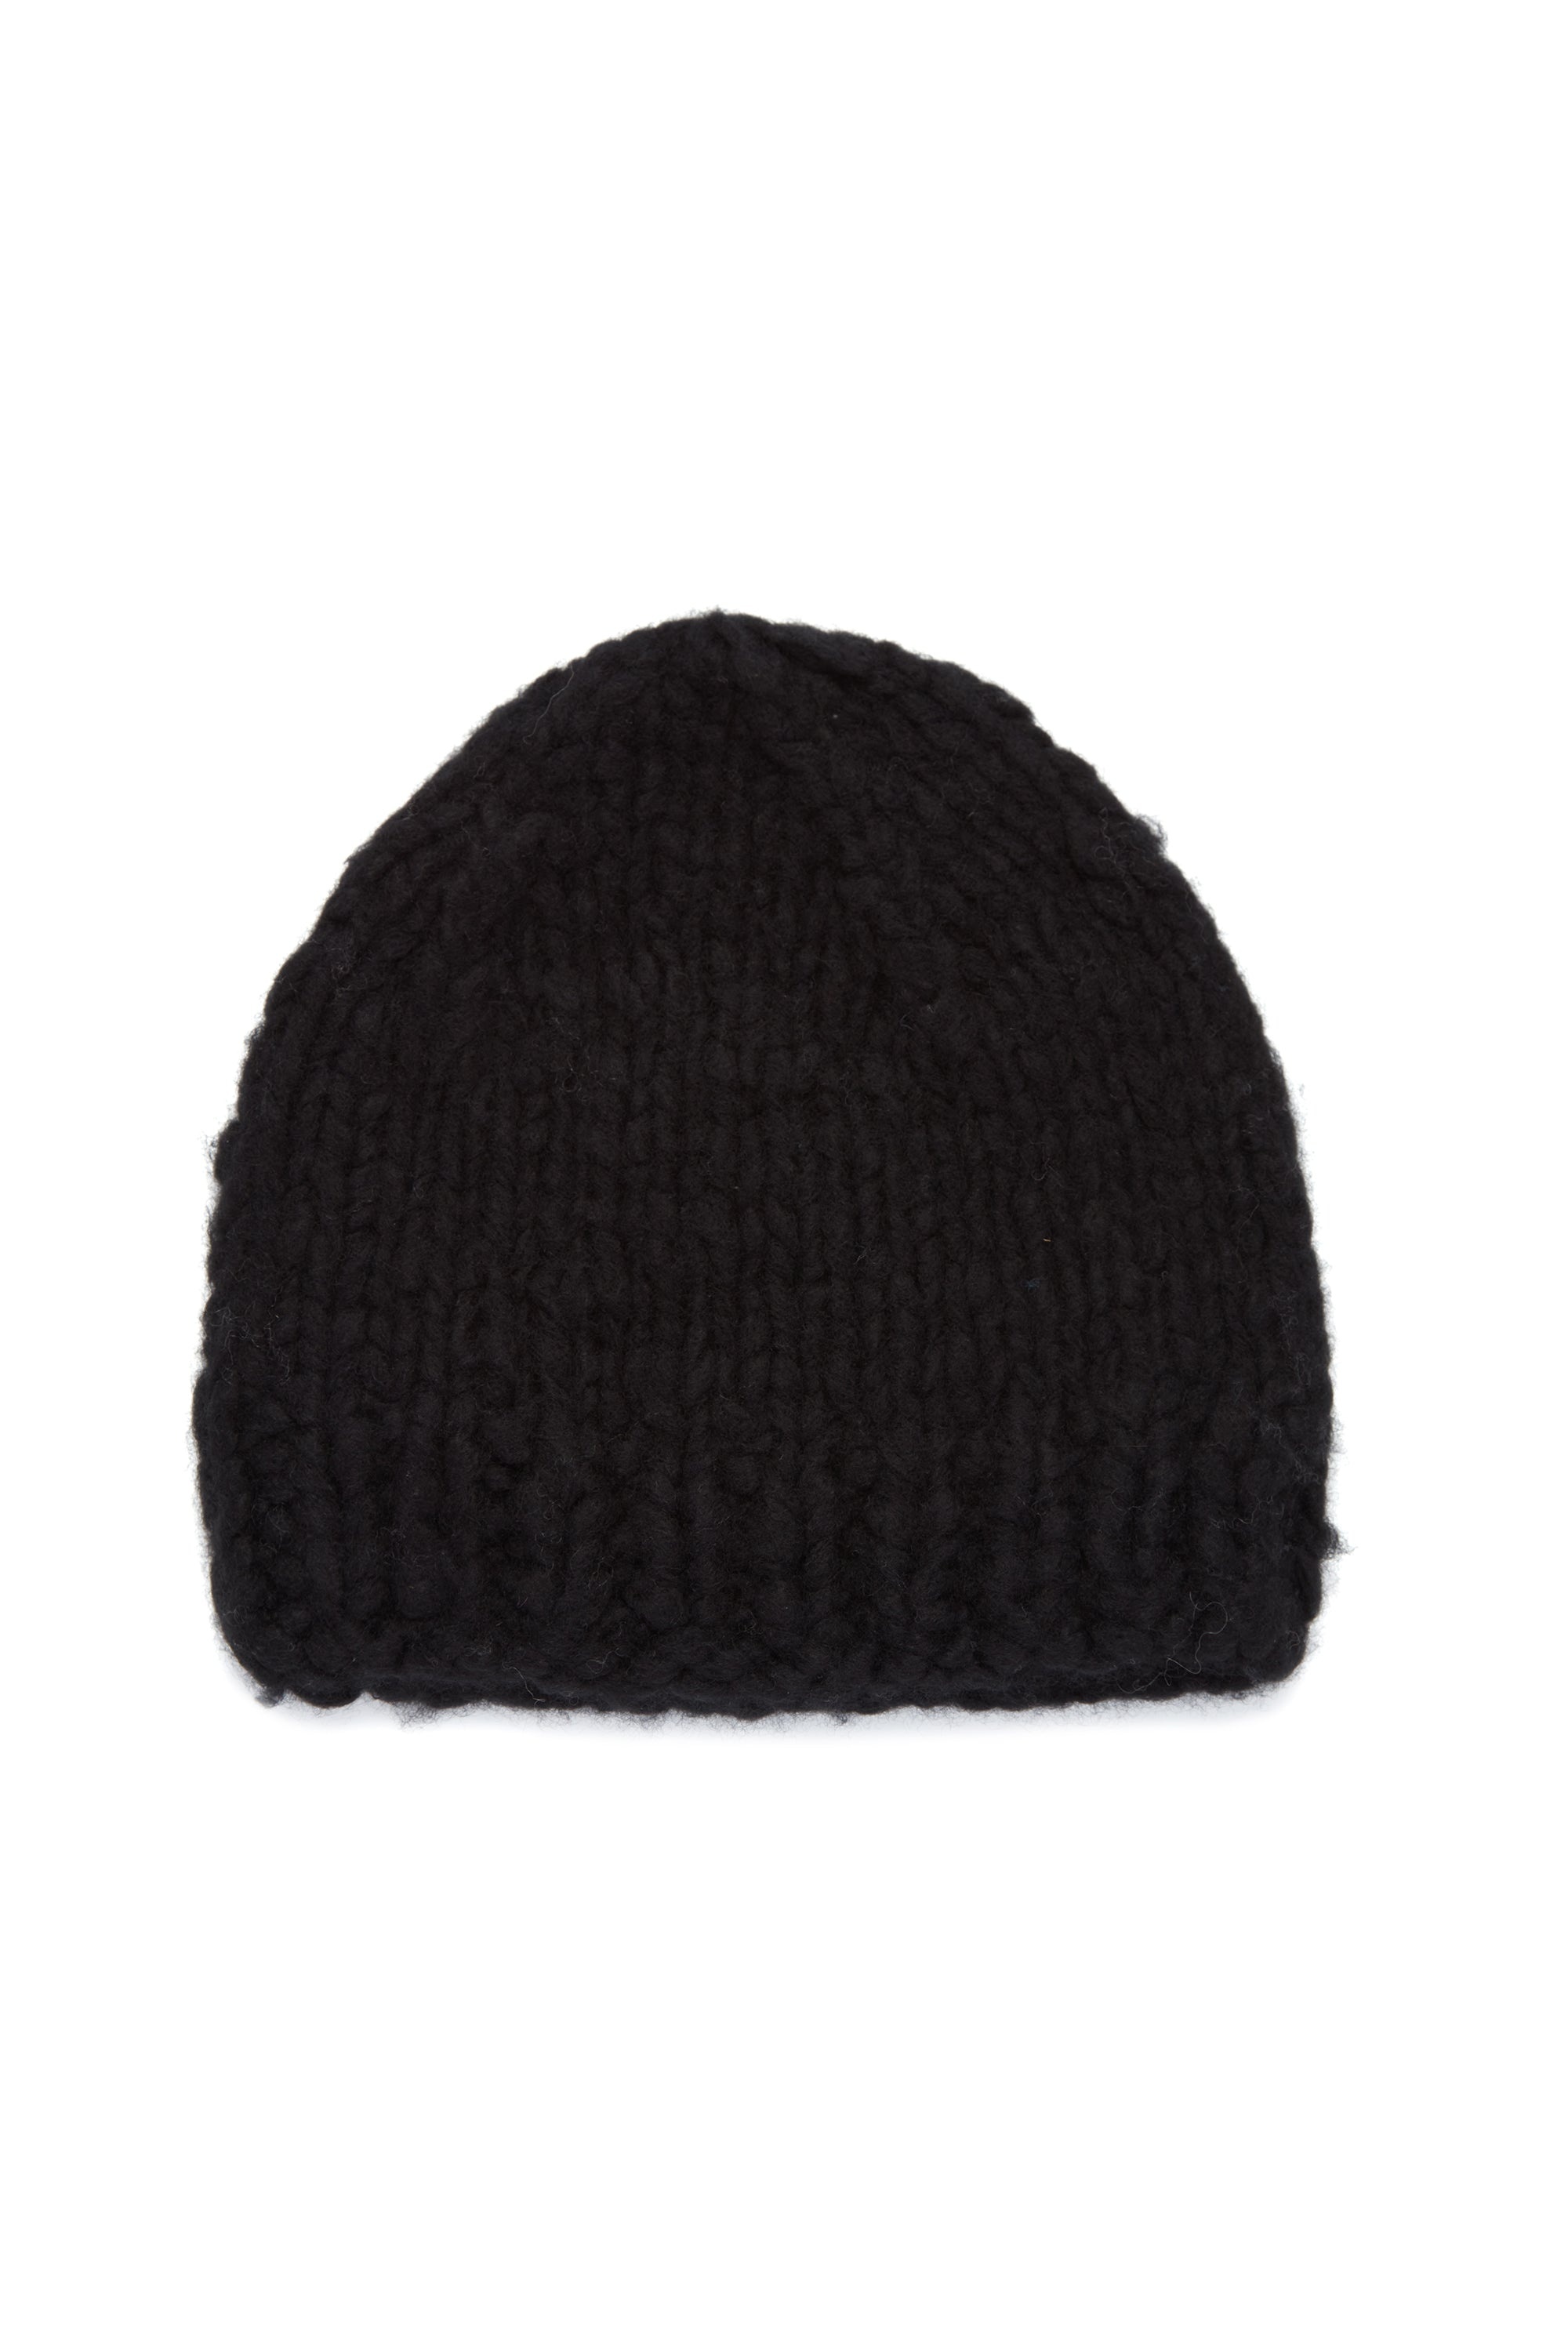 Pacino Knit Hat in Black Welfat Cashmere - 1